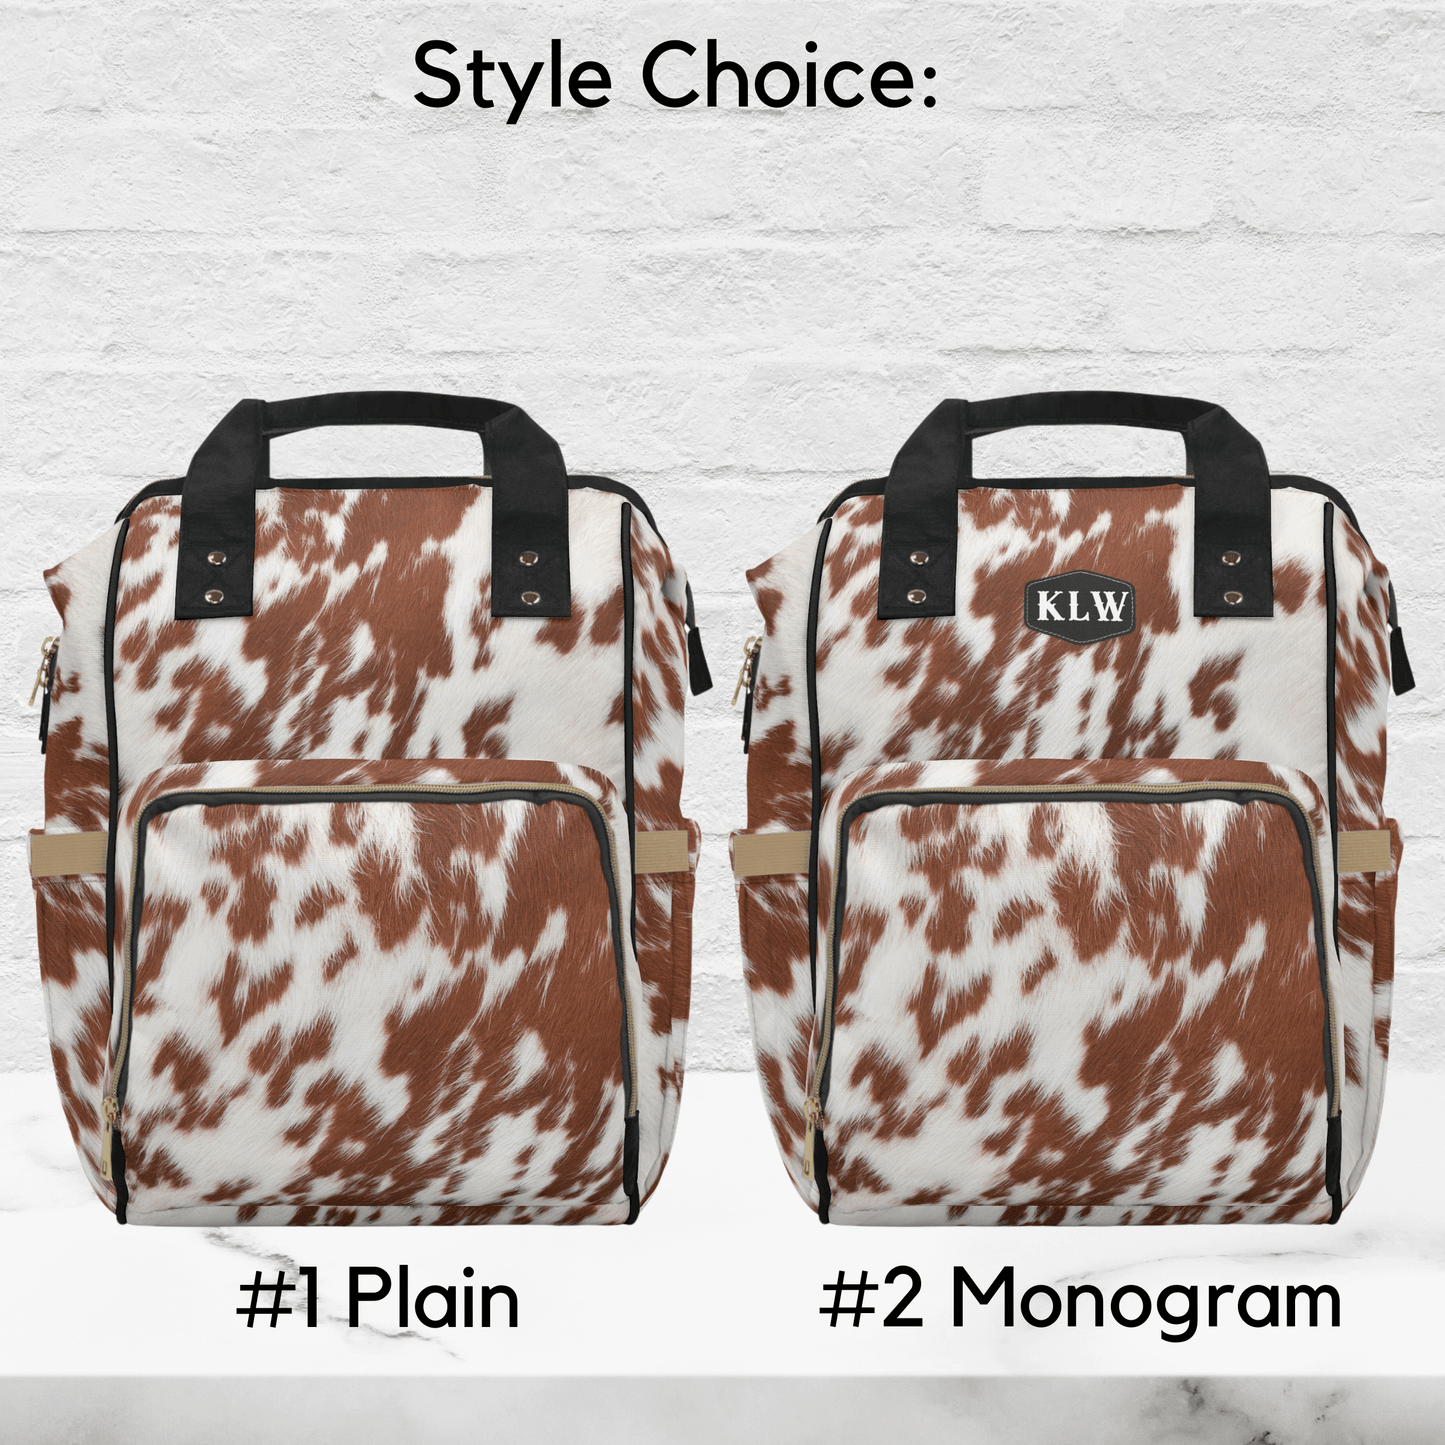 Our style choices both shown here is plain without monogramming and with added initials up to three on a black patch to match the black handles.